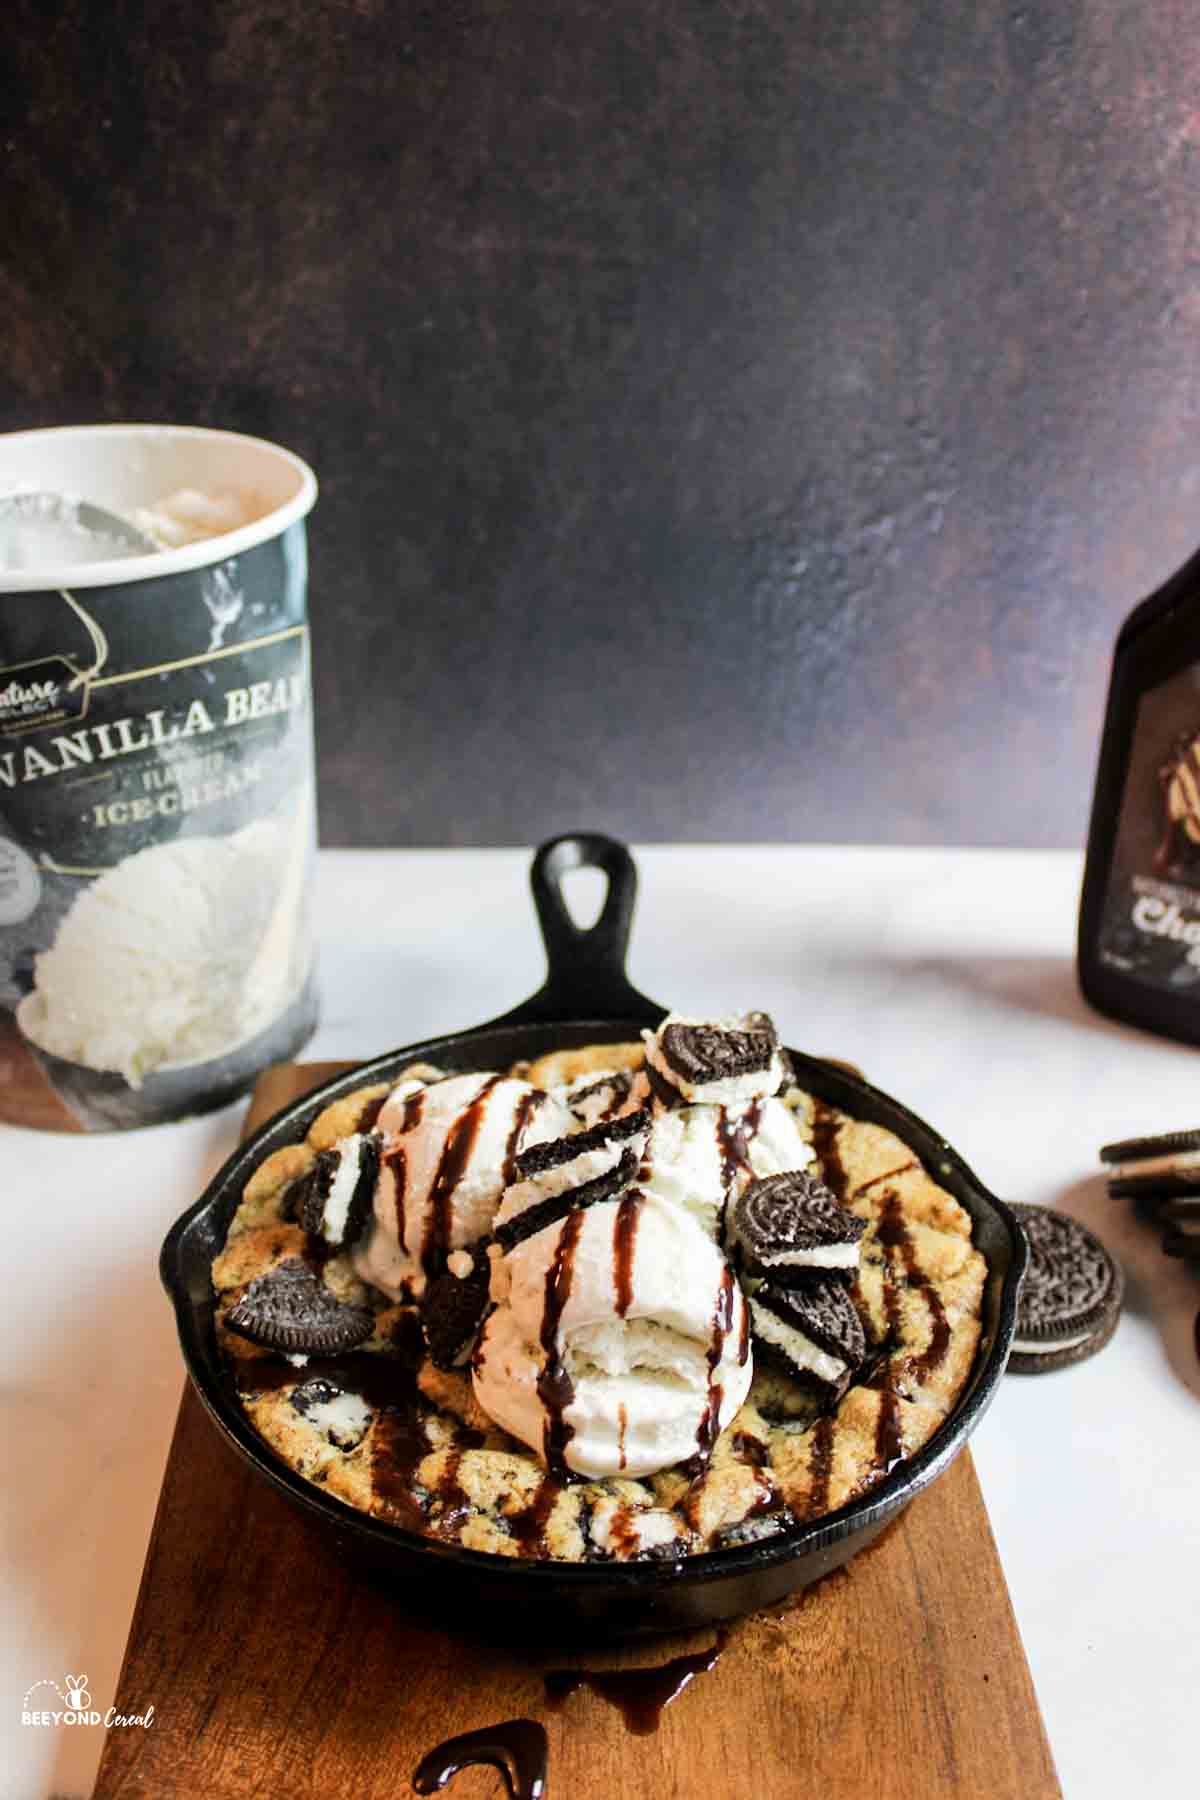 a chocolate syrup and oreo topped vanilla ice cream scoop above a bakedoreo pizookie with ice cream and chocolate syrup bottle in background